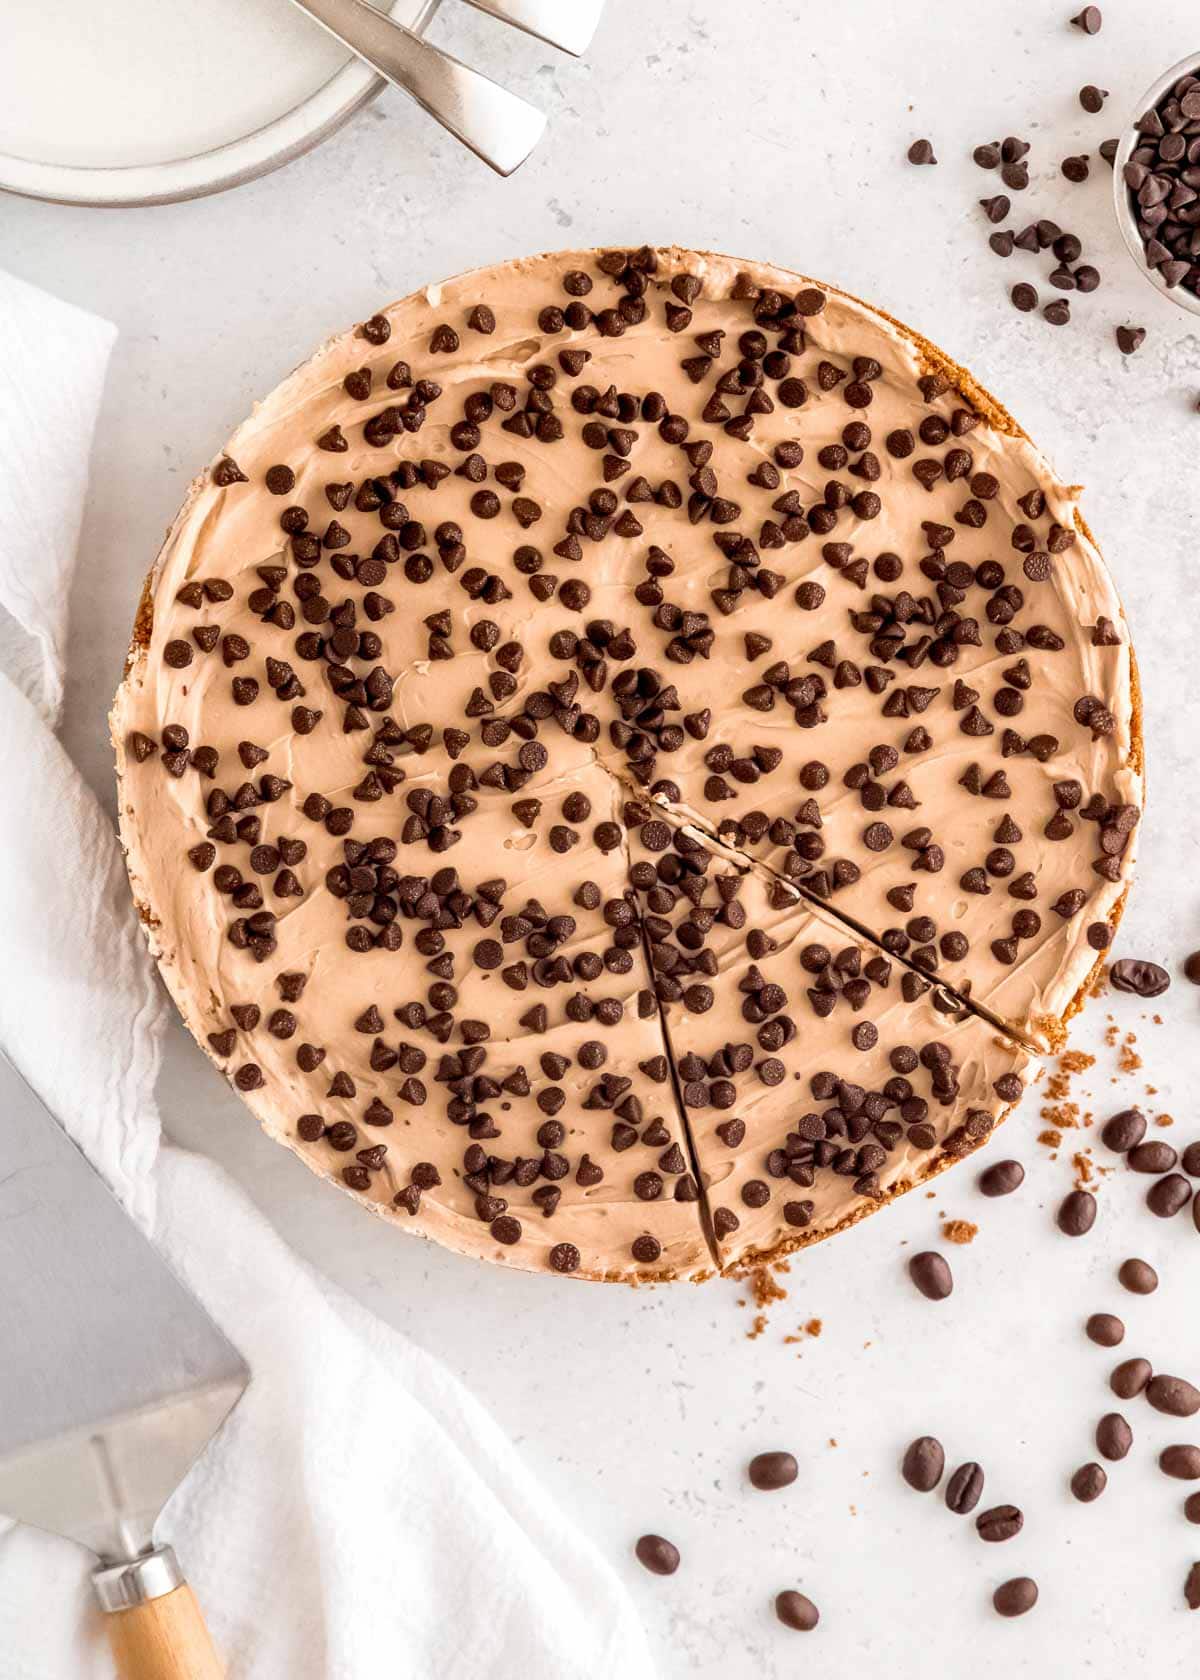 Enjoy unbelievable espresso flavor in this delicious No Bake Mocha Cheesecake! Rich, creamy, and perfect for holidays and celebrations.